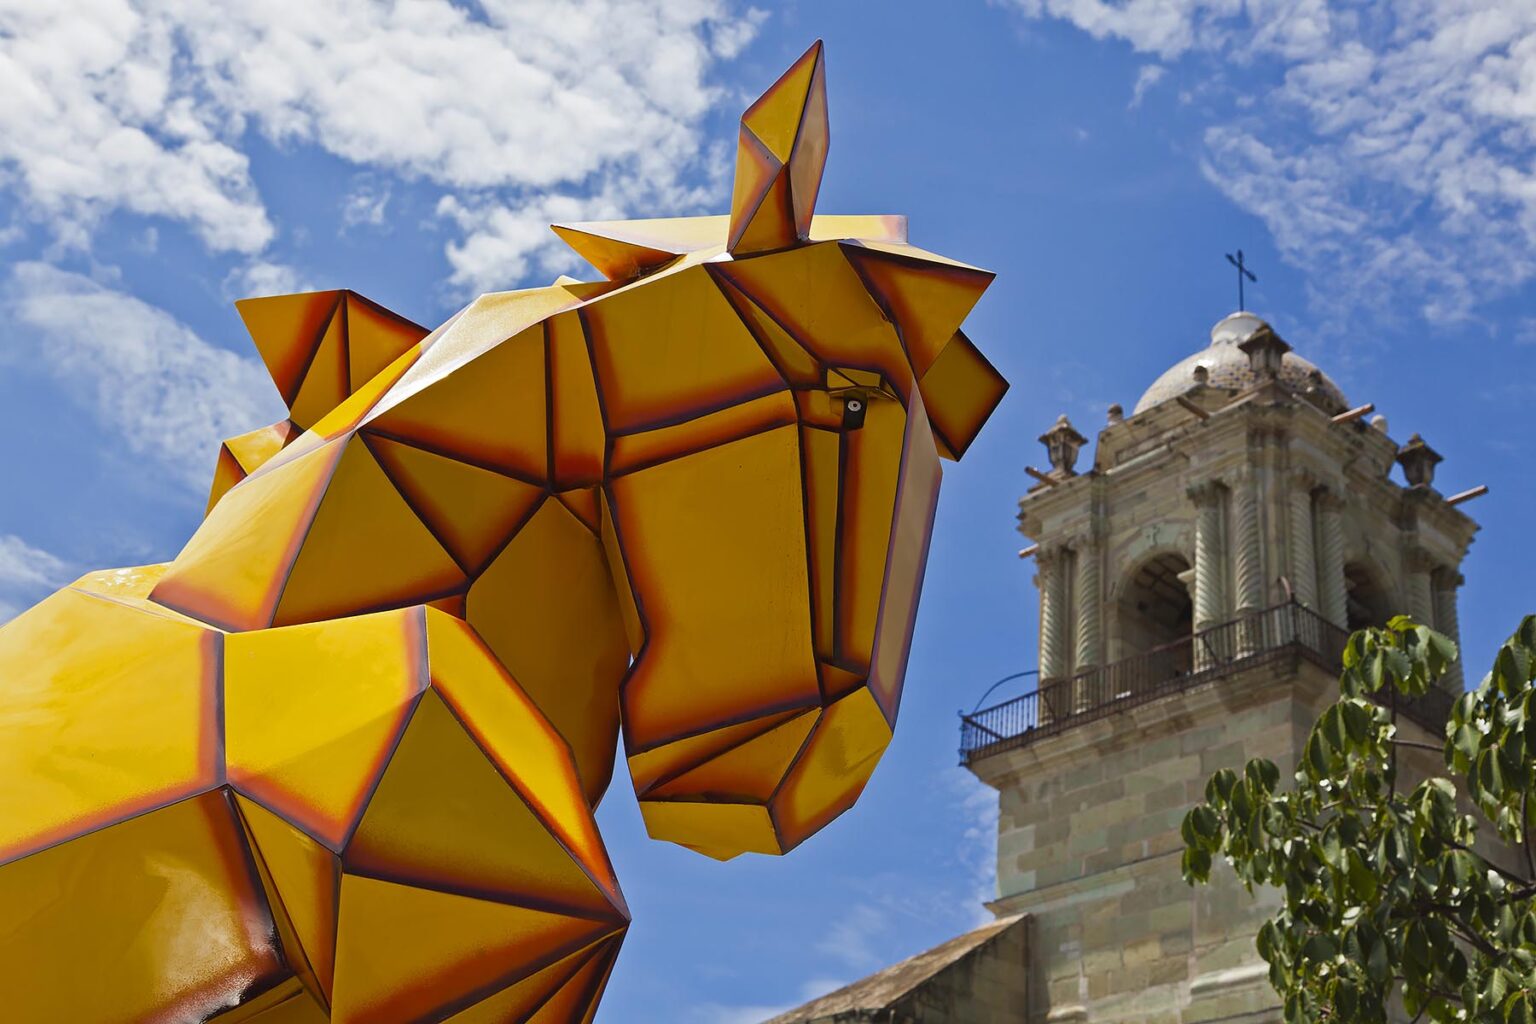 A YELLOW HORSE SCULPTURE on display in front of the Oaxacan Cathedral - OAXACA, MEXICO